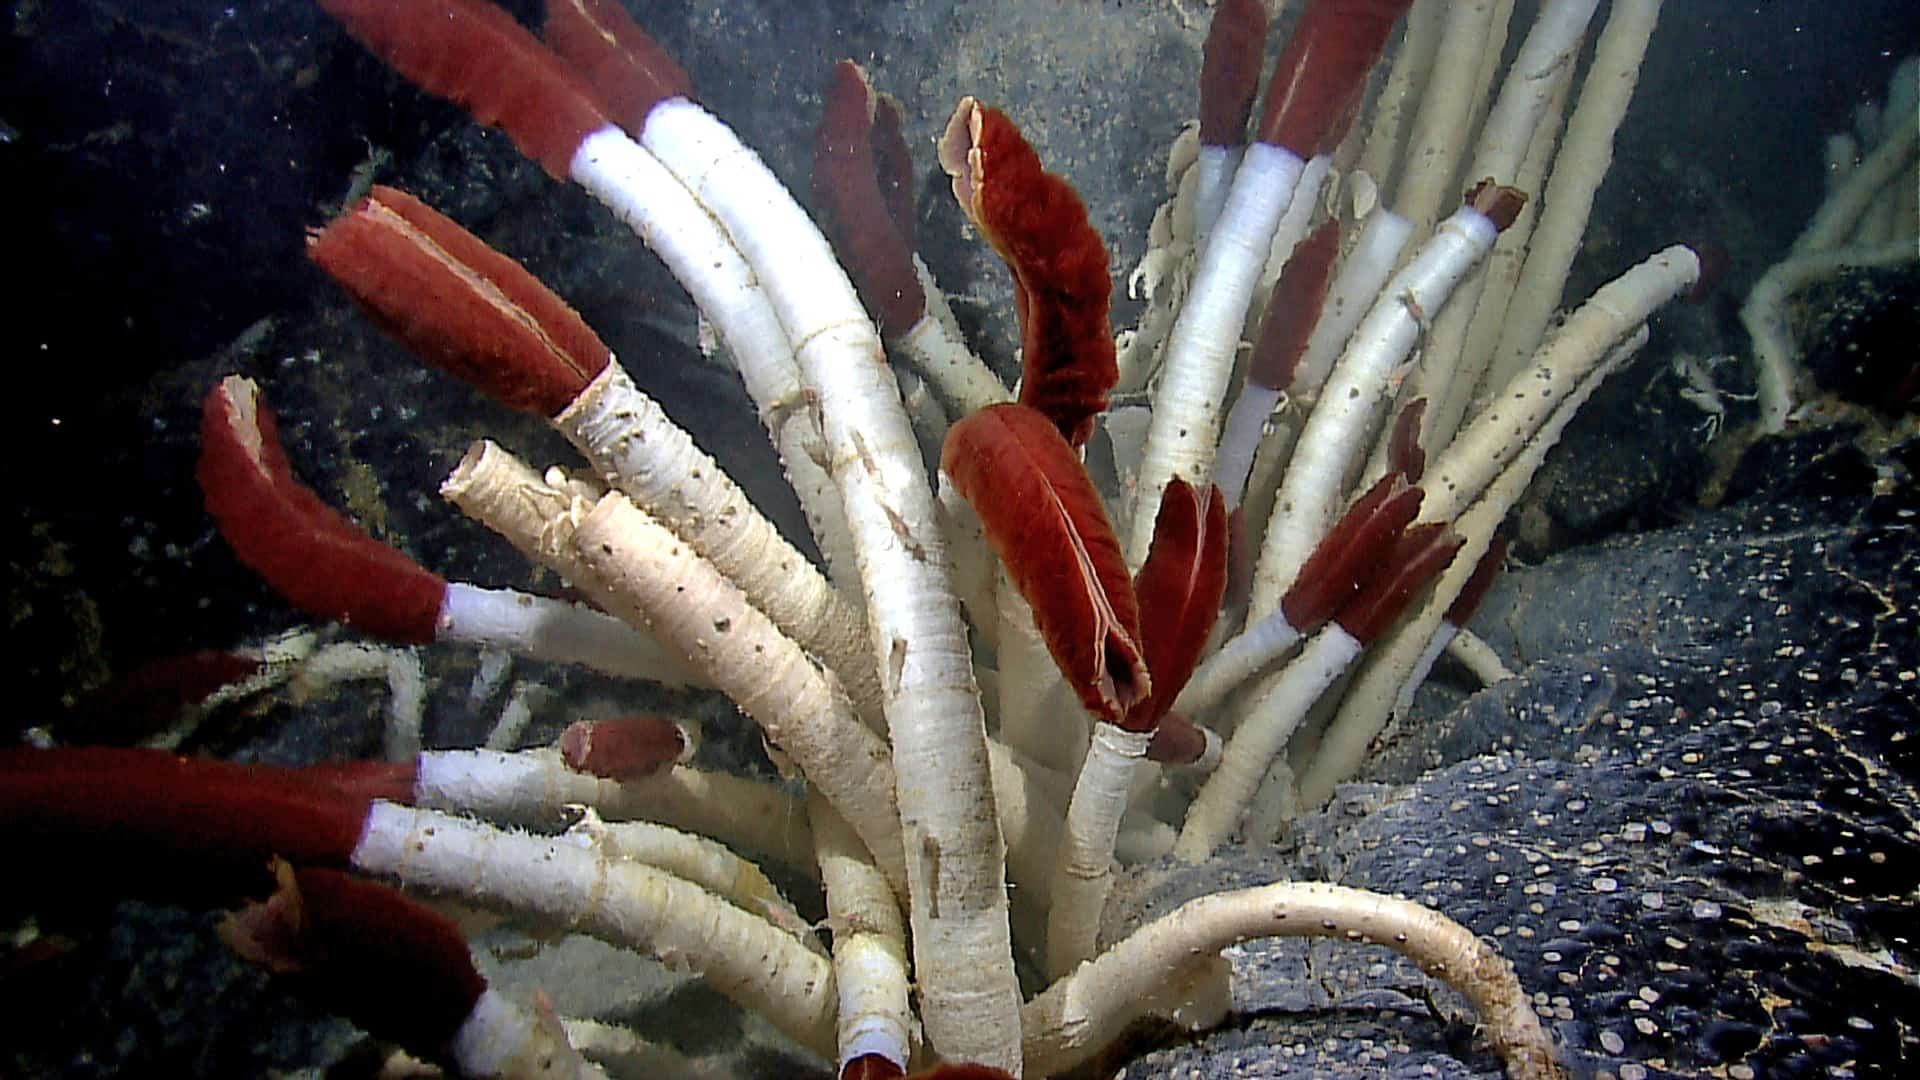 Giant tube worms (Riftia pachyptila) live at extreme depths in the ocean. They’re over 6 and a half feet long, and they are found between 6200 and 11,8000 feet below sea level. Hydrothermal vents sustain them in isolated spots along the East Pacific Rise and near the Galapagos Islands.